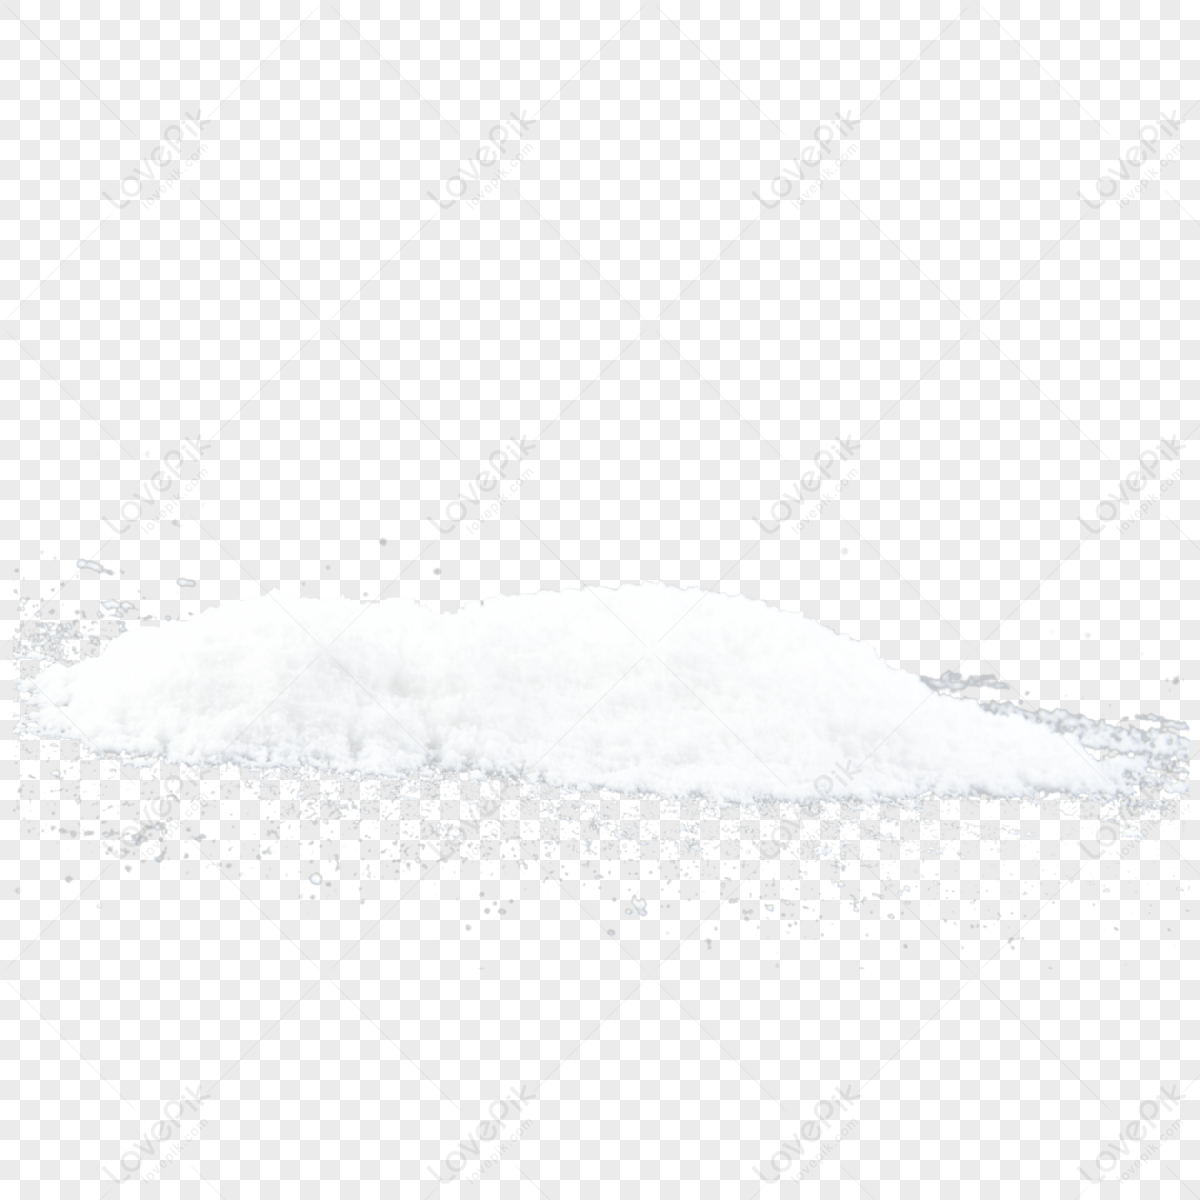 White Snowflakes PNG Transparent, White Snowflake Background, Winter,  Christmas, Snow PNG Image For Free Download